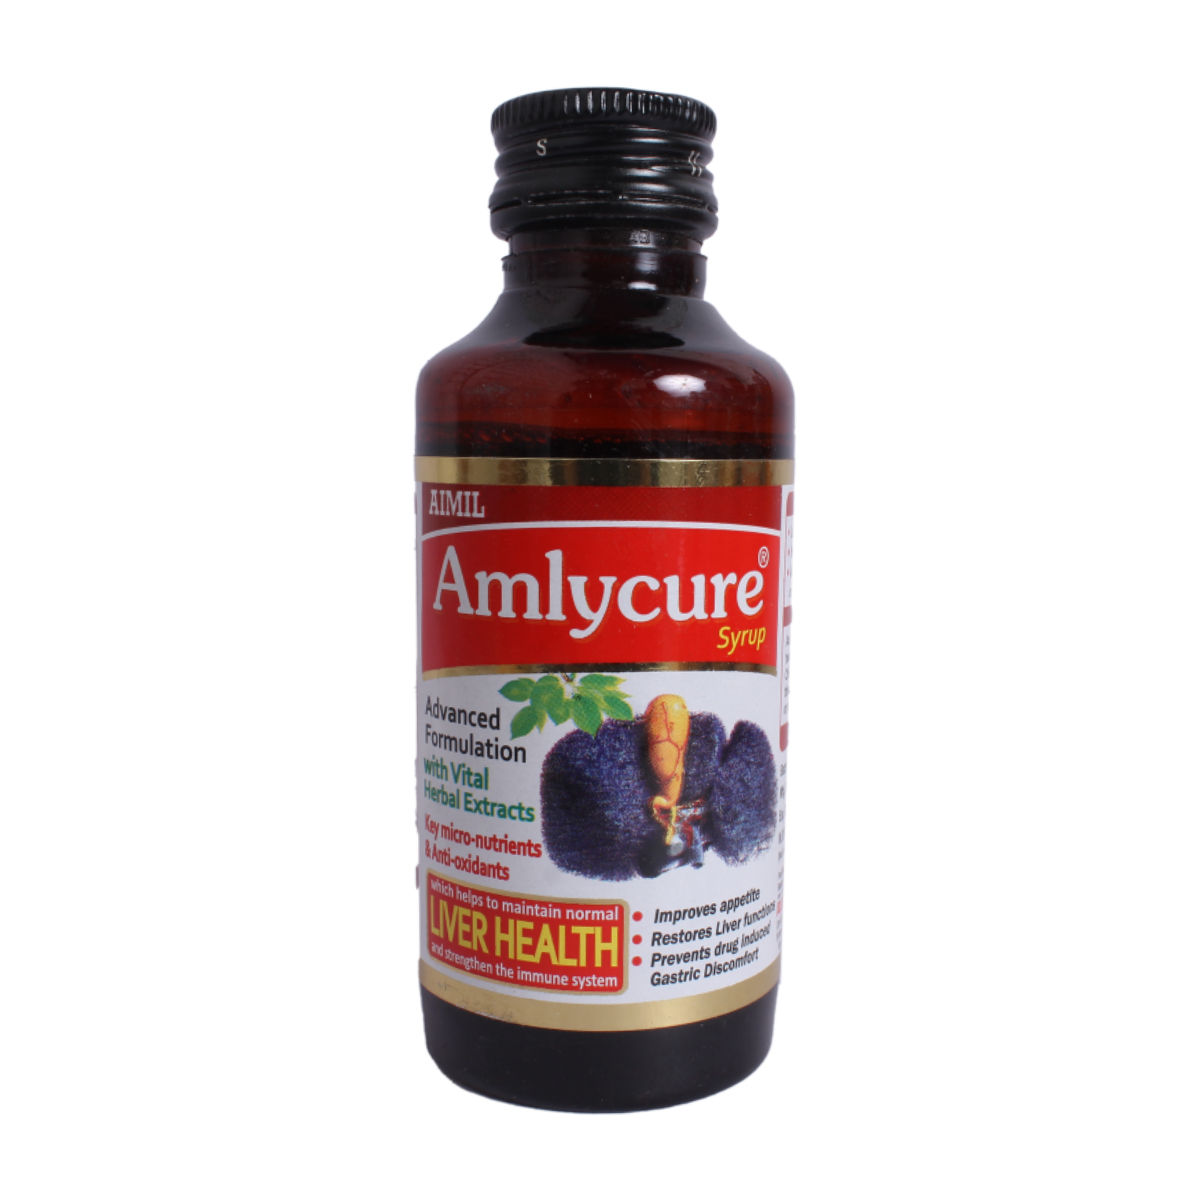 Aimil Amlycure Syrup, 100 ml, Pack of 1 